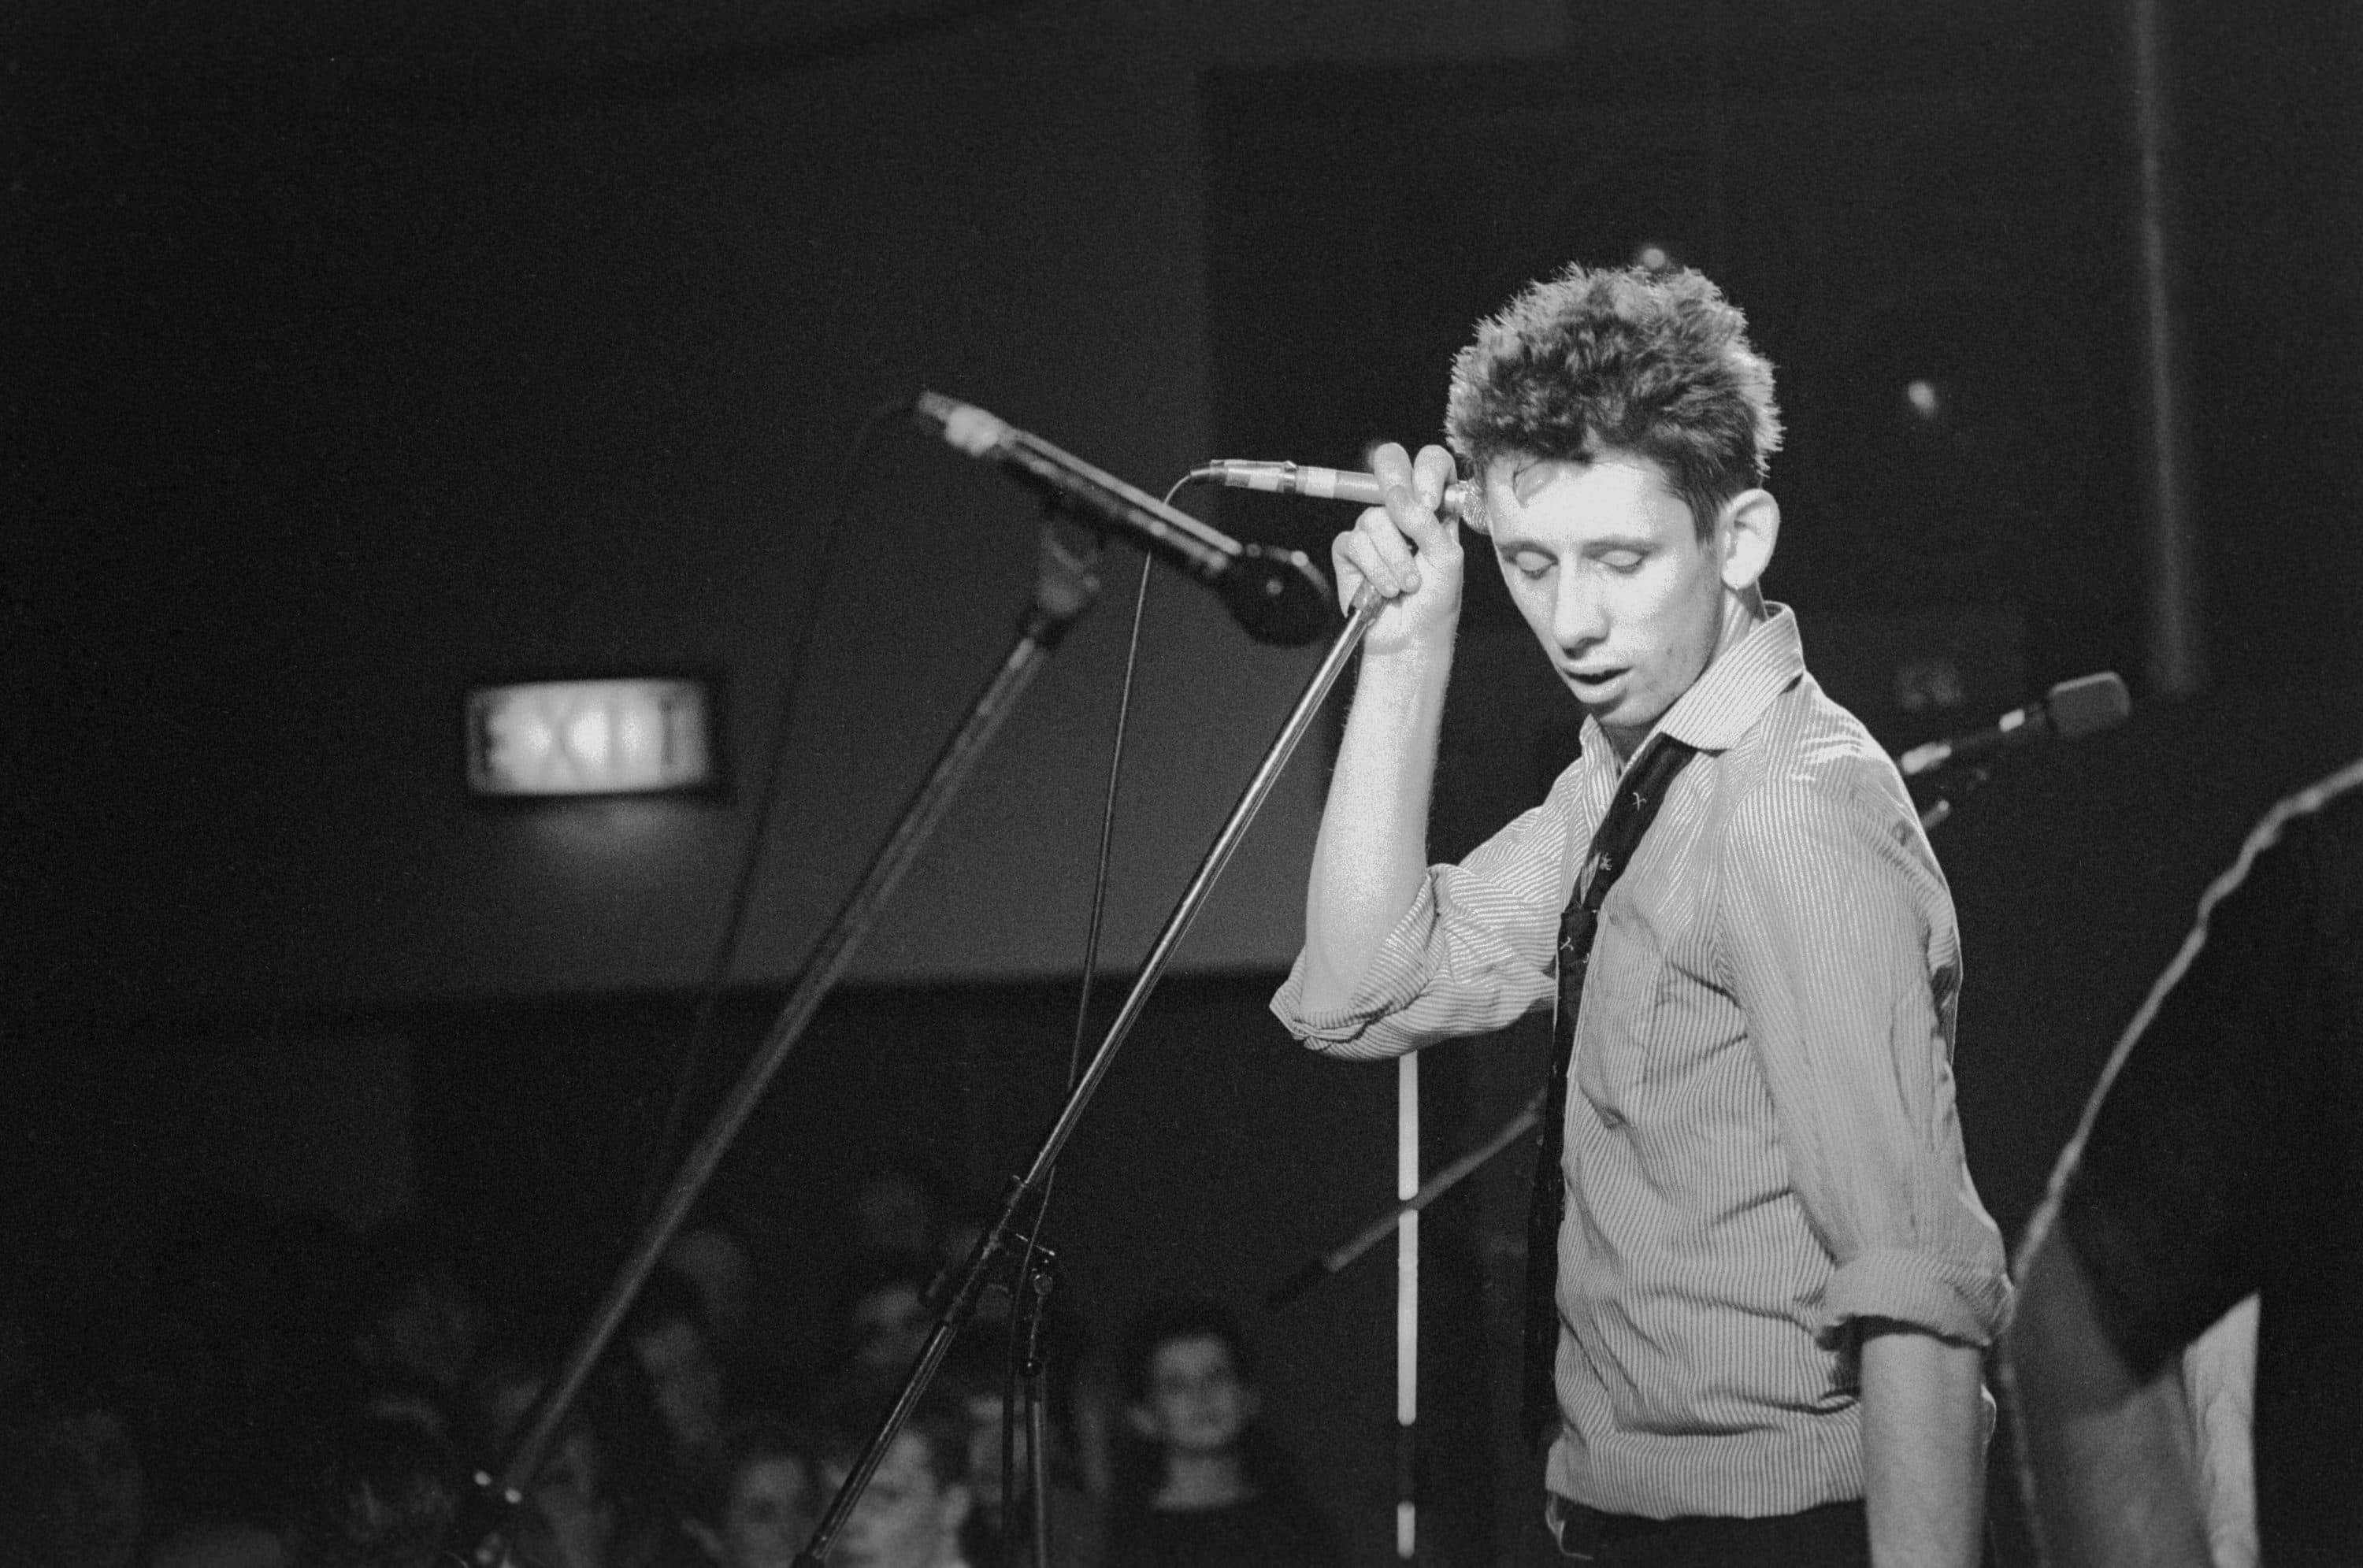 Shane MacGowan live onstage in 1988, from the 2020 documentary &quot;Crock of Gold: A Few Rounds with Shane MacGowan.&quot; (Courtesy Magnolia Pictures)